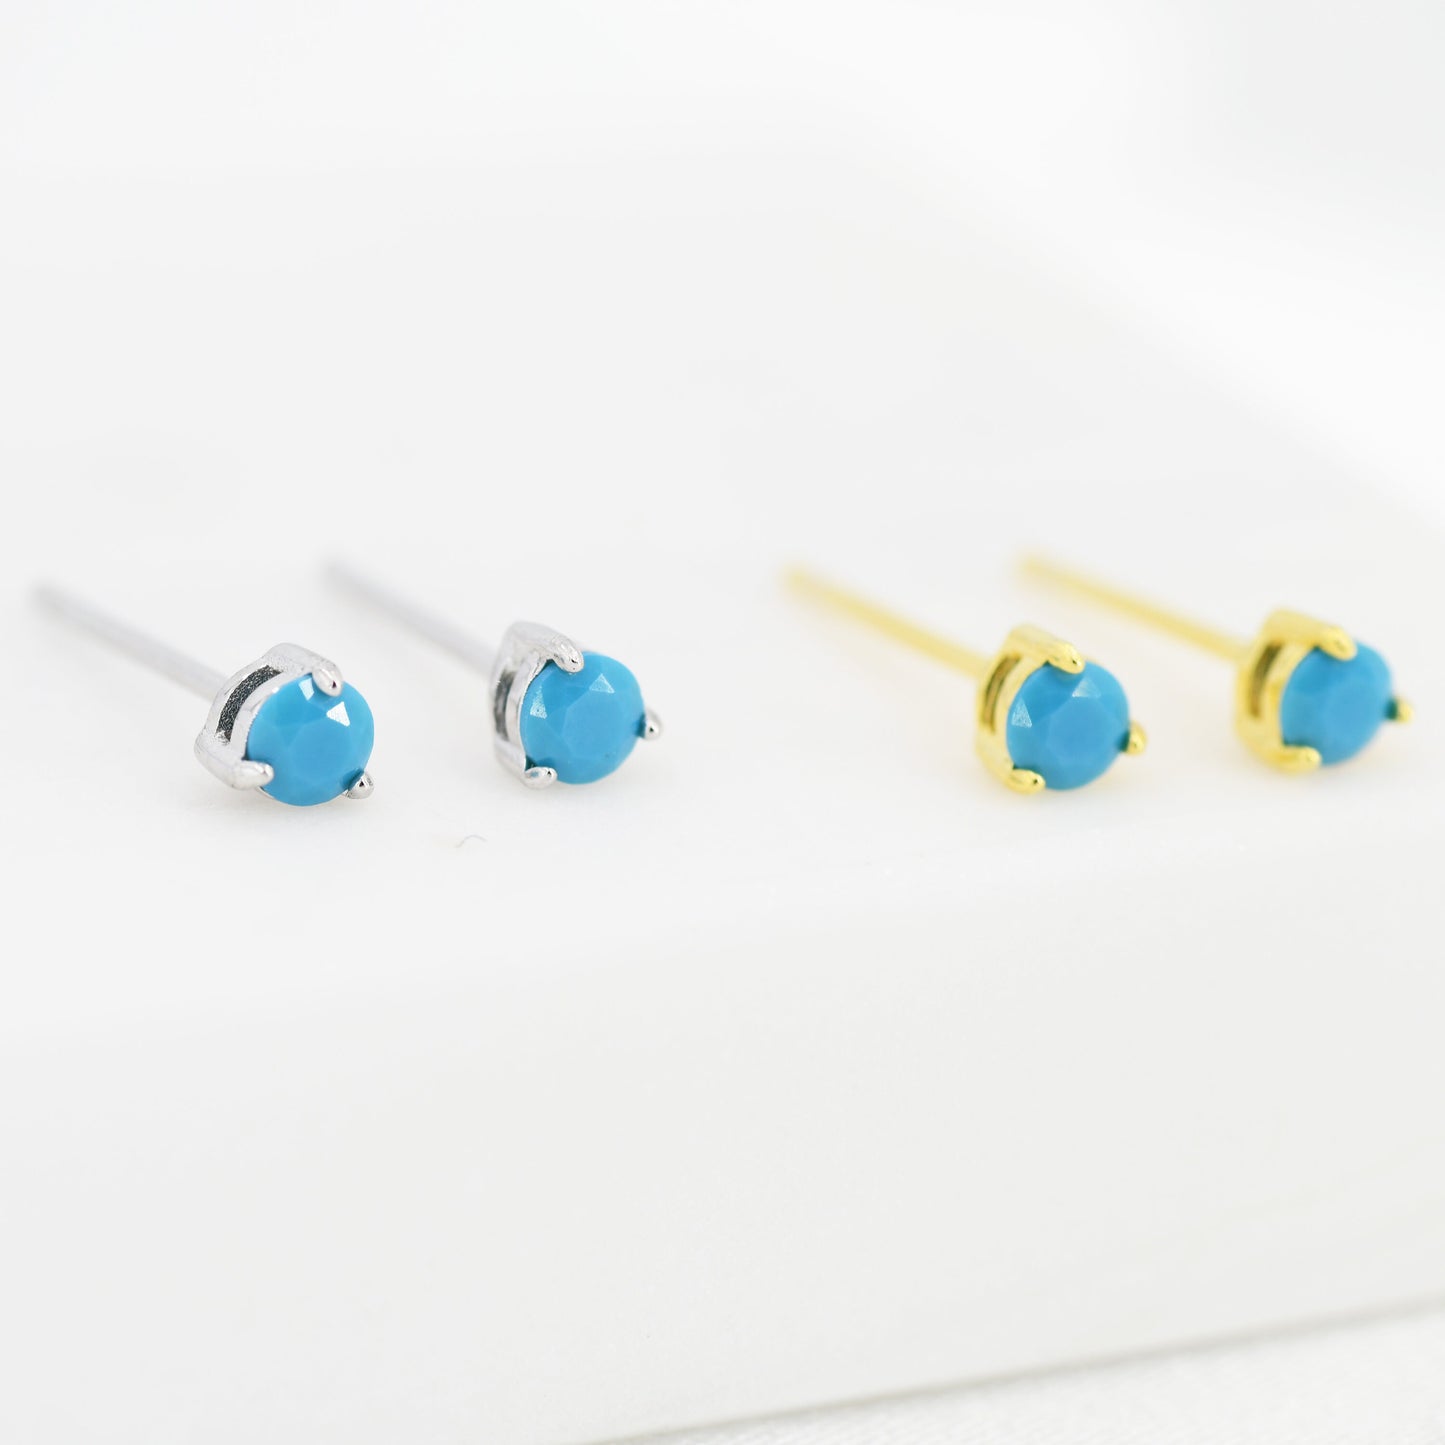 Tiny Turquoise CZ Stud Earrings in Sterling Silver, Silver or Gold, 3mm, Three Prong, Blue Stacking Earrings